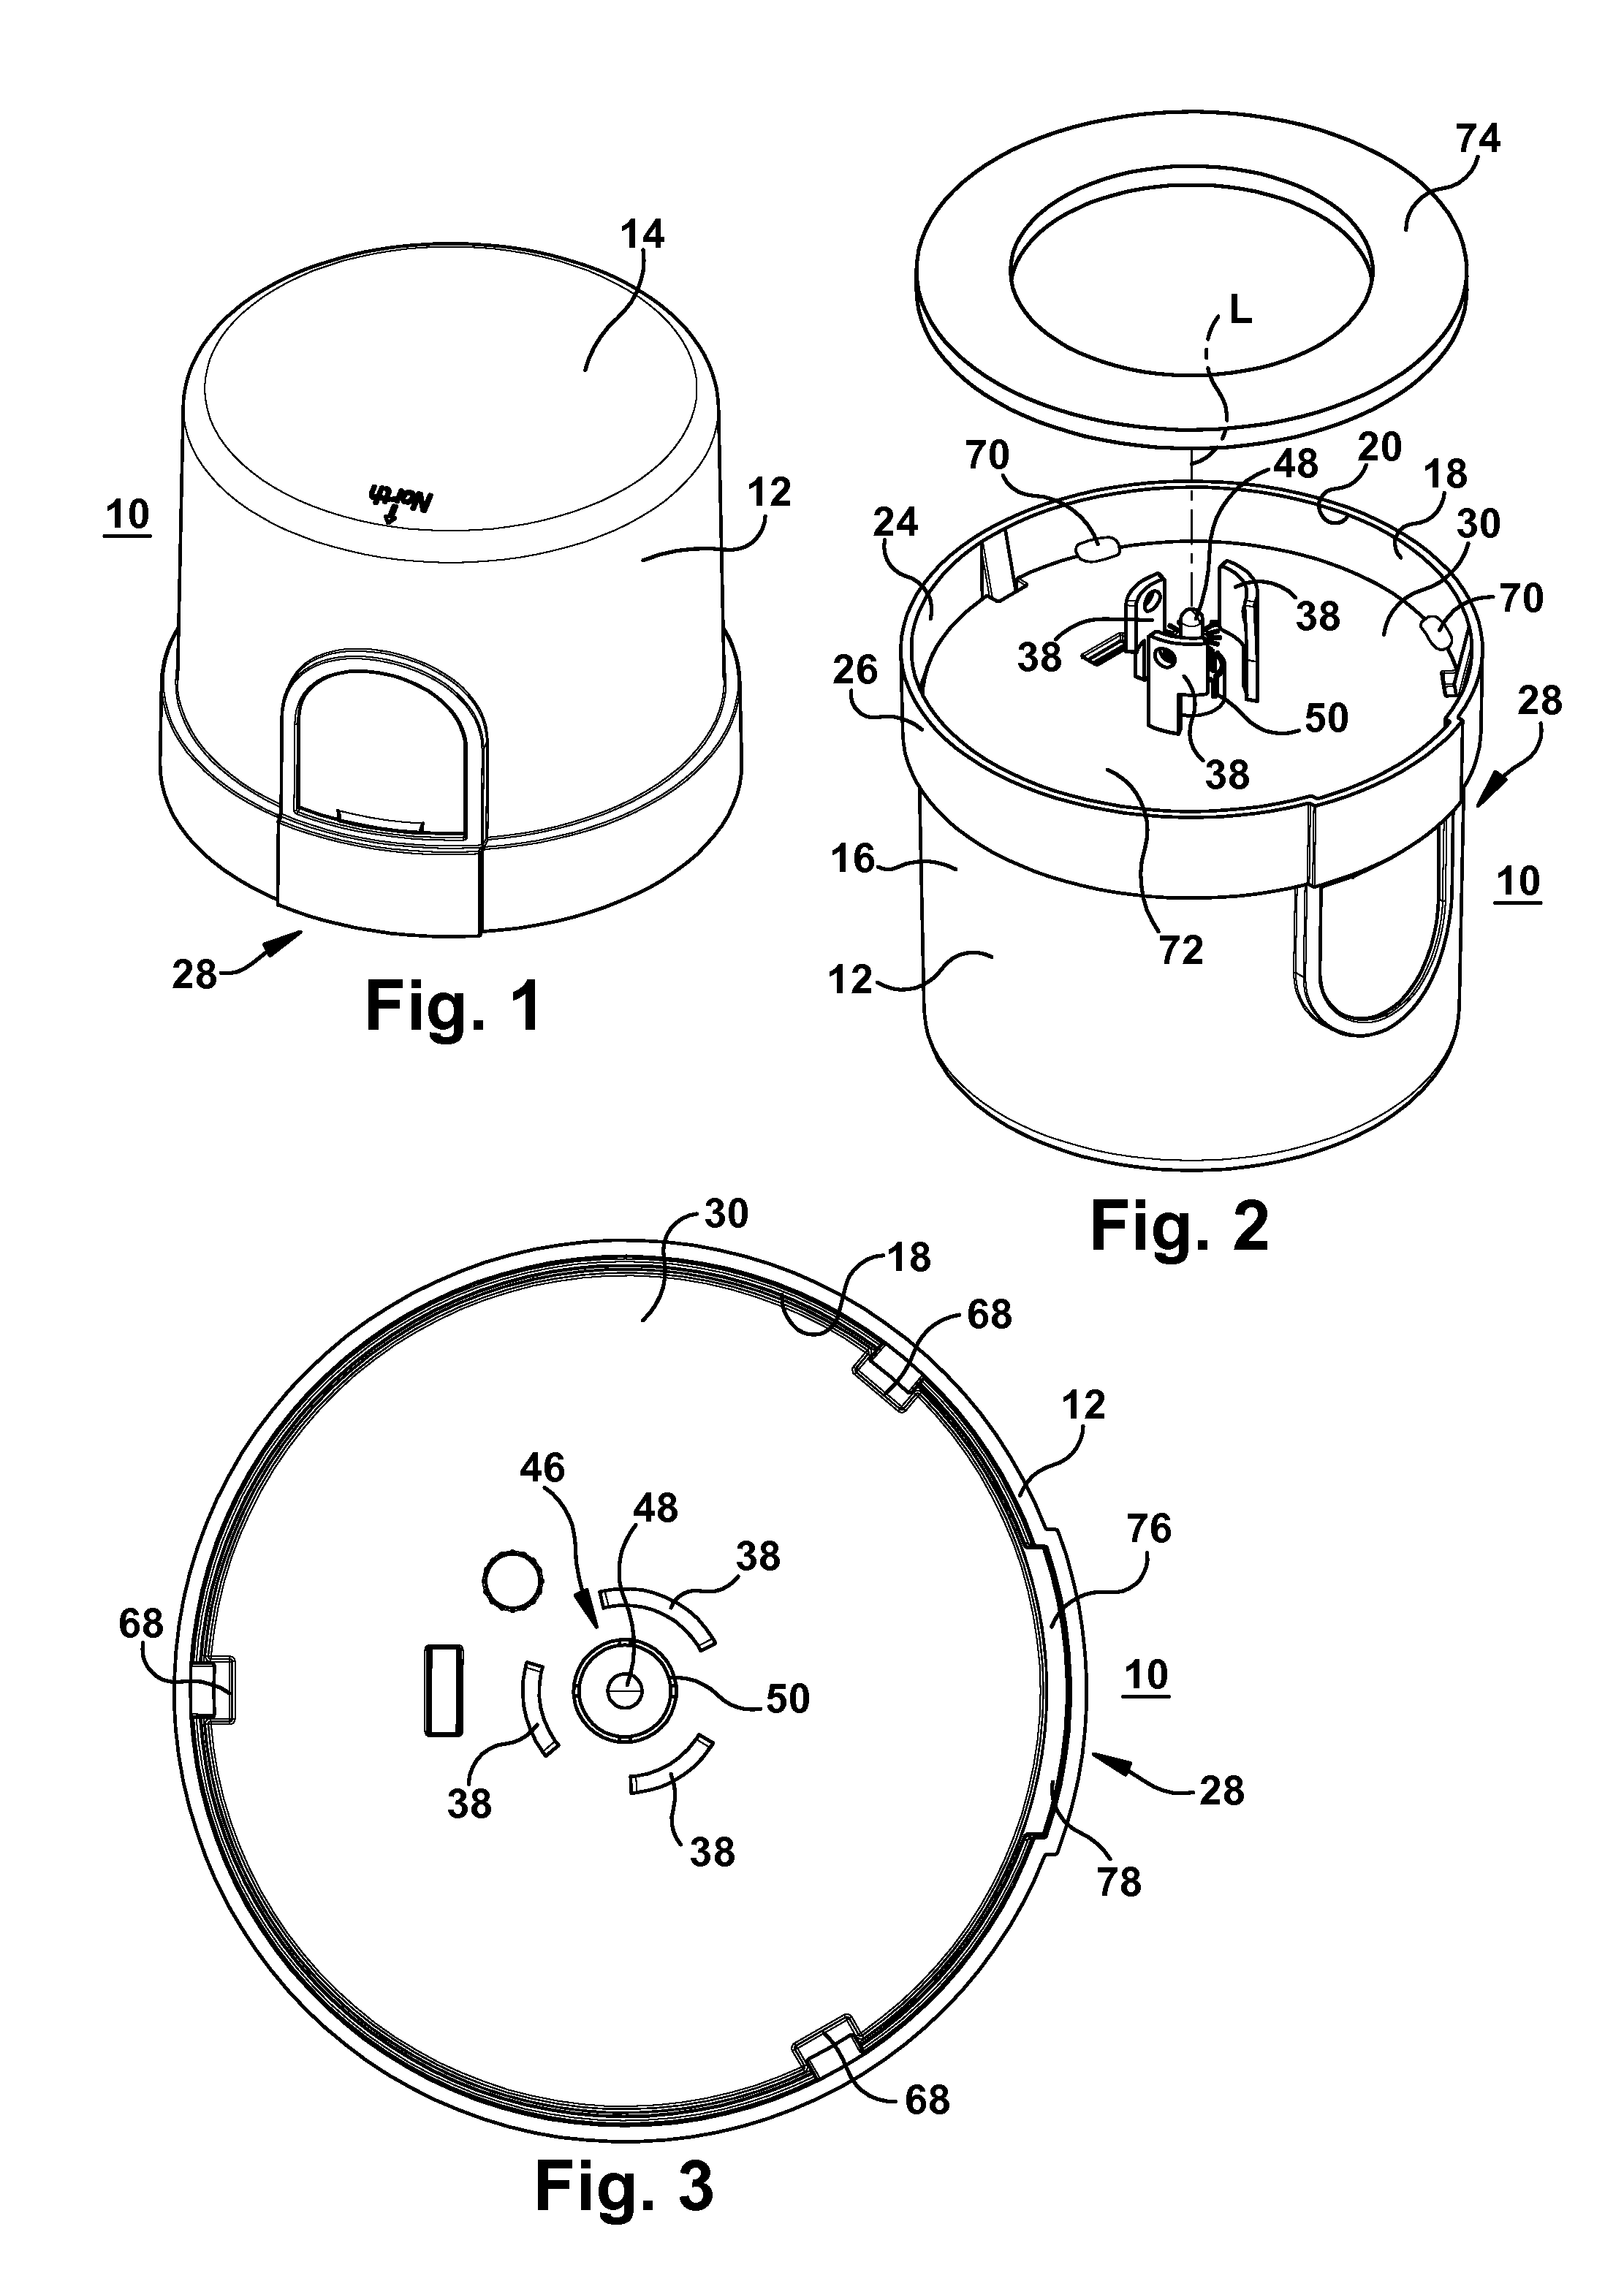 System assembly and design of photoelectric controller device